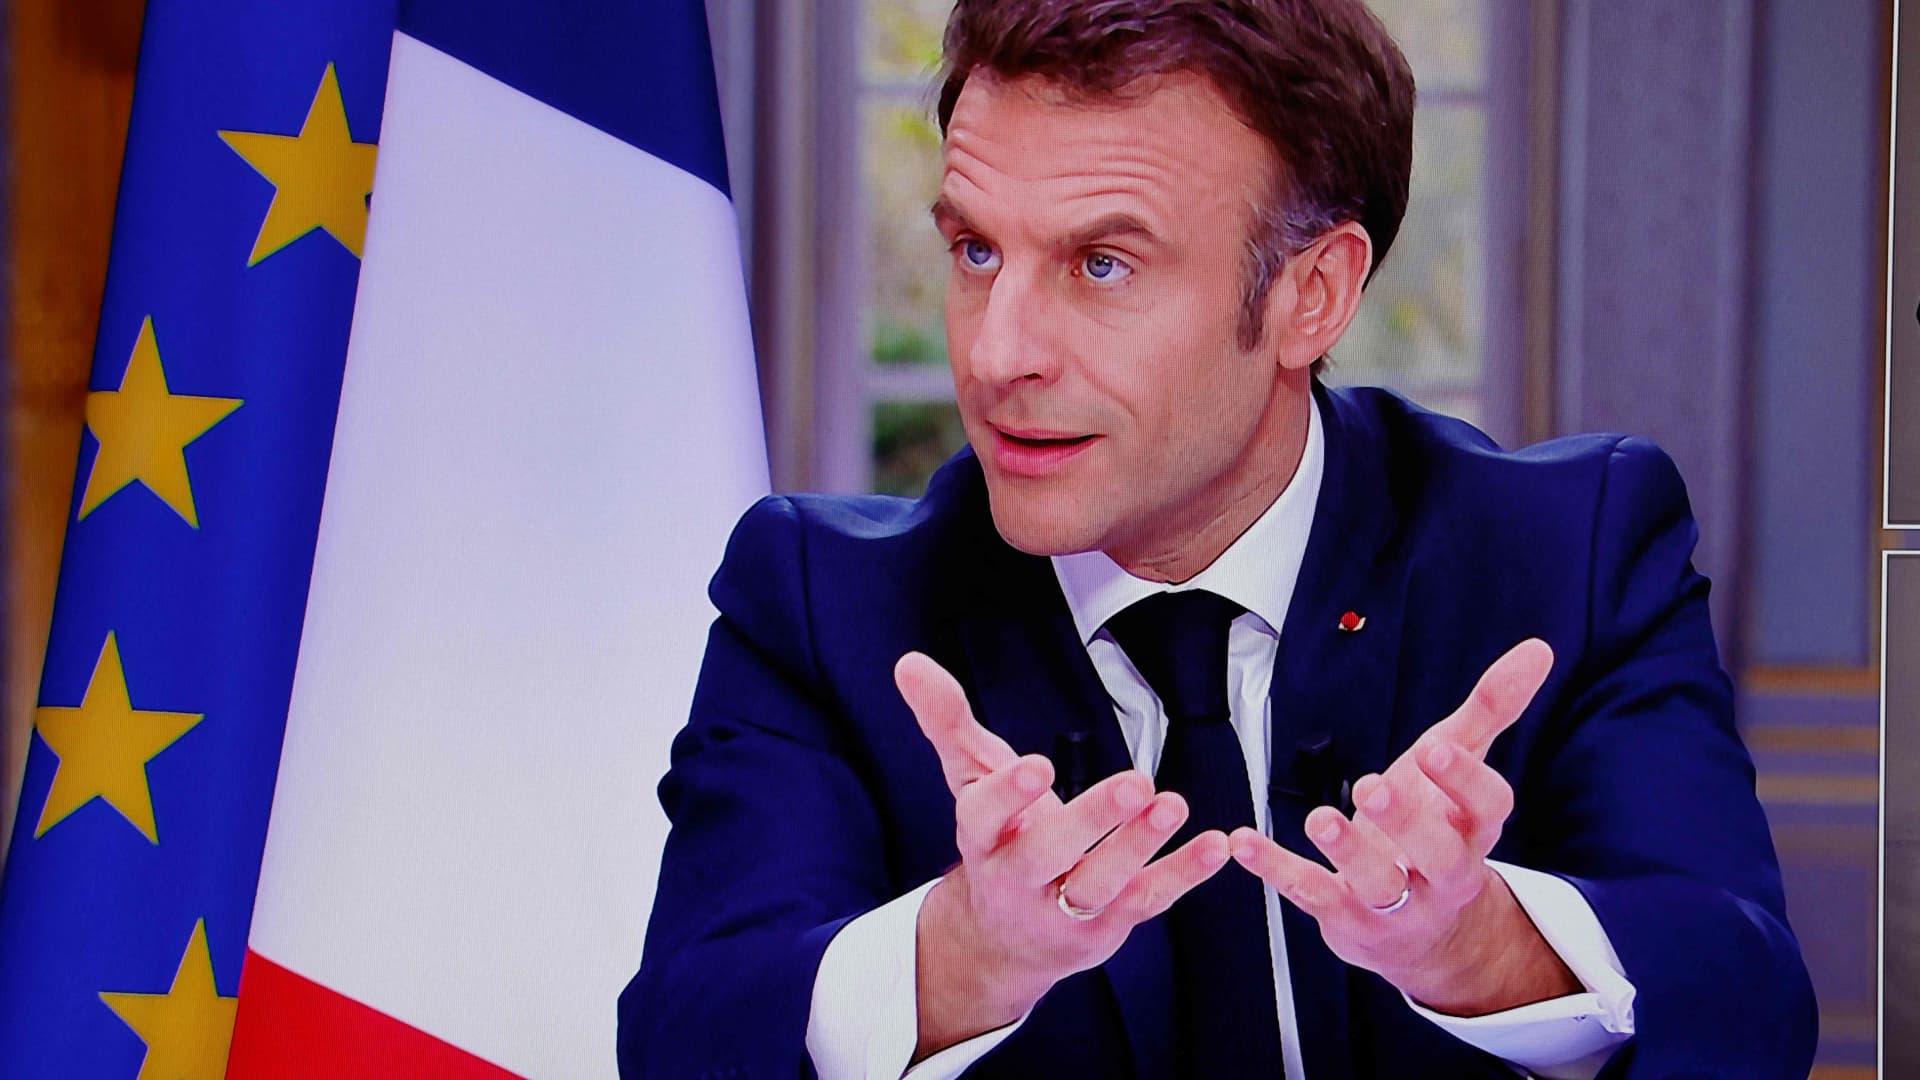 "We are a Nuclear power too" -- France warns Putin